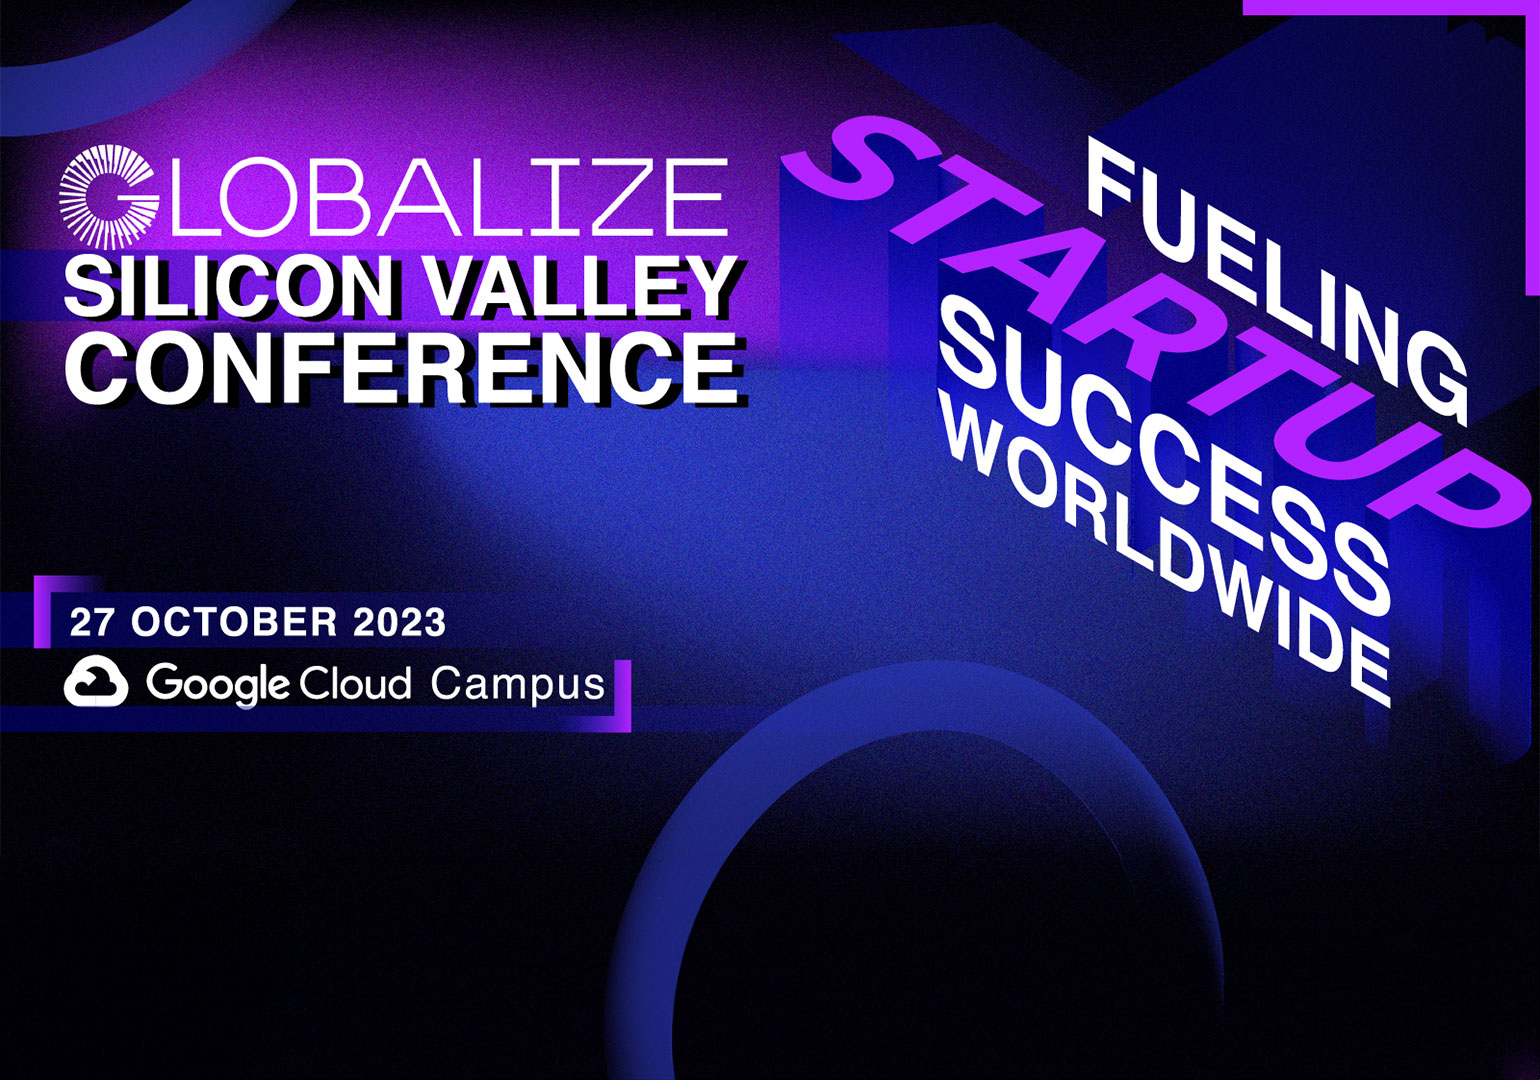 Globalize Silicon Valley Conference Will Be Held at Google Cloud Campus, Silicon Valley